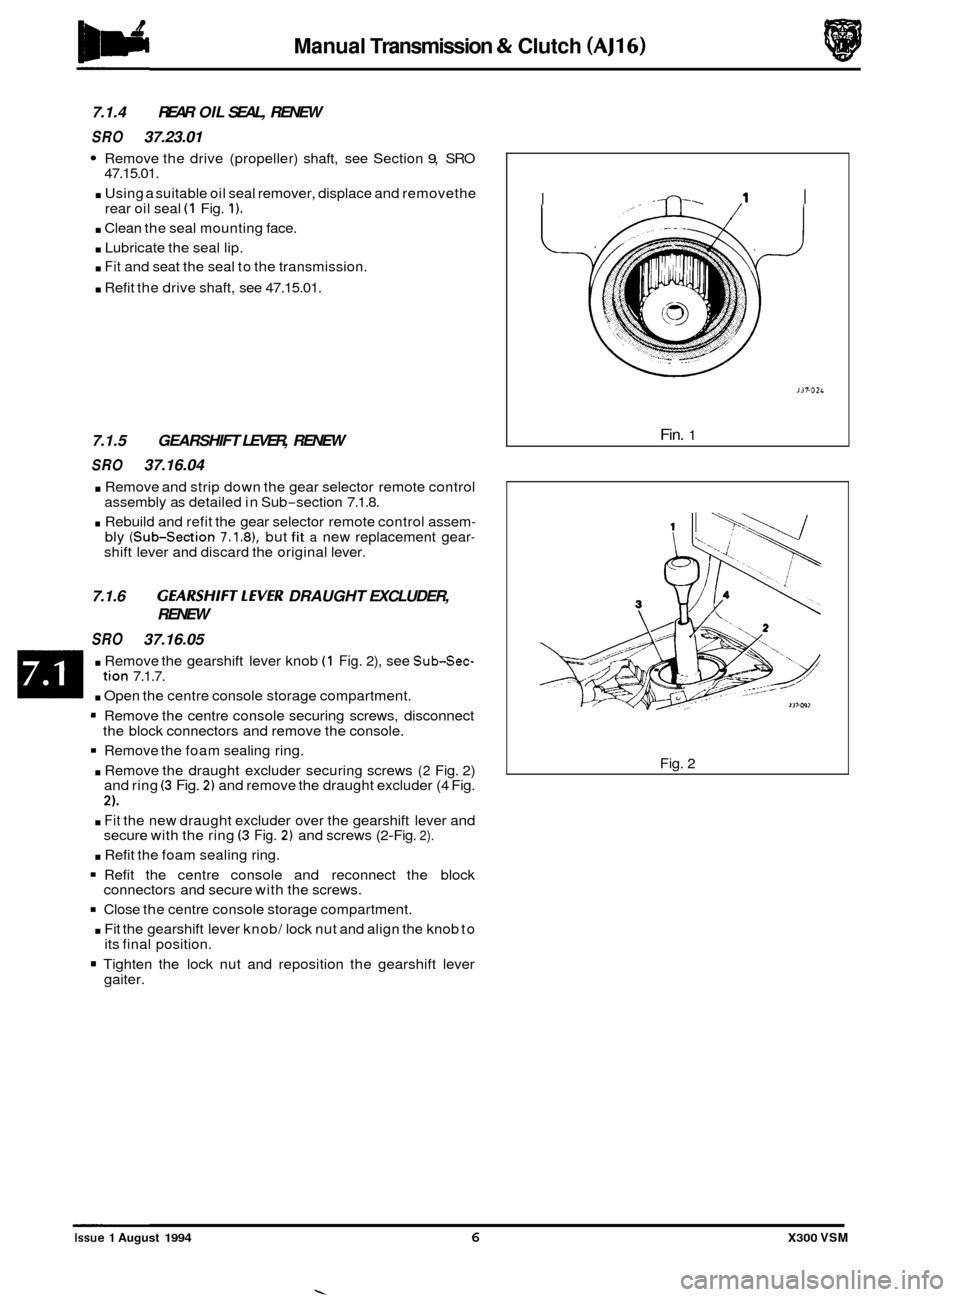 JAGUAR XJ6 1994 2.G Workshop Manual Manual Transmission & Clutch (AJ16) 
7.1.4  REAR OIL SEAL,  RENEW 
SRO 37.23.01 
Remove  the drive  (propeller)  shaft,  see Section 9, SRO 
47.15.01. 
. Using  a suitable  oil seal remover, displace 